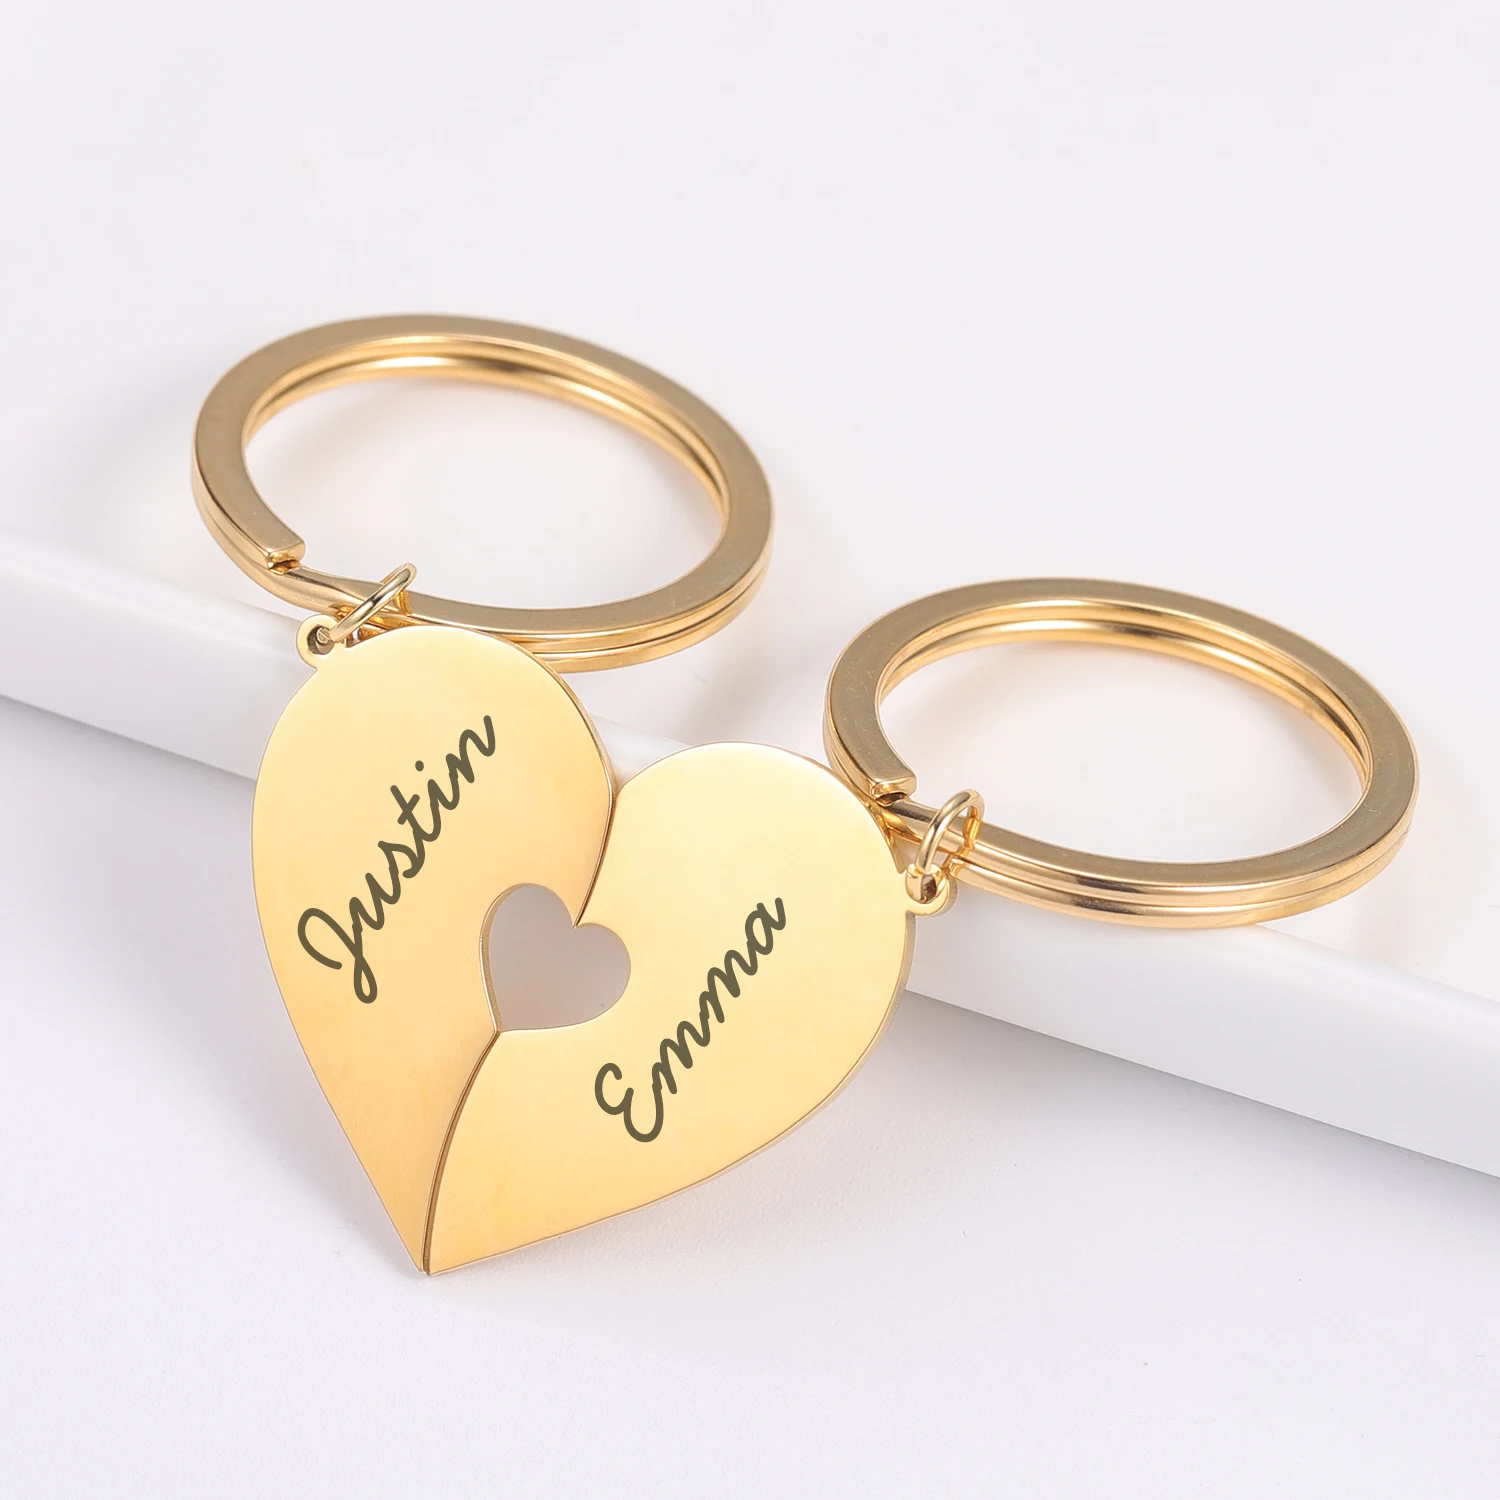 2Pcs Personalized Couples Keychain Valentine Anniversary Gift Boyfriend Girlfriend Heart KeyChain Man Women Key Chain Love Gifts valentine s day keychain resin mold love heart keyring pendant silicone mould